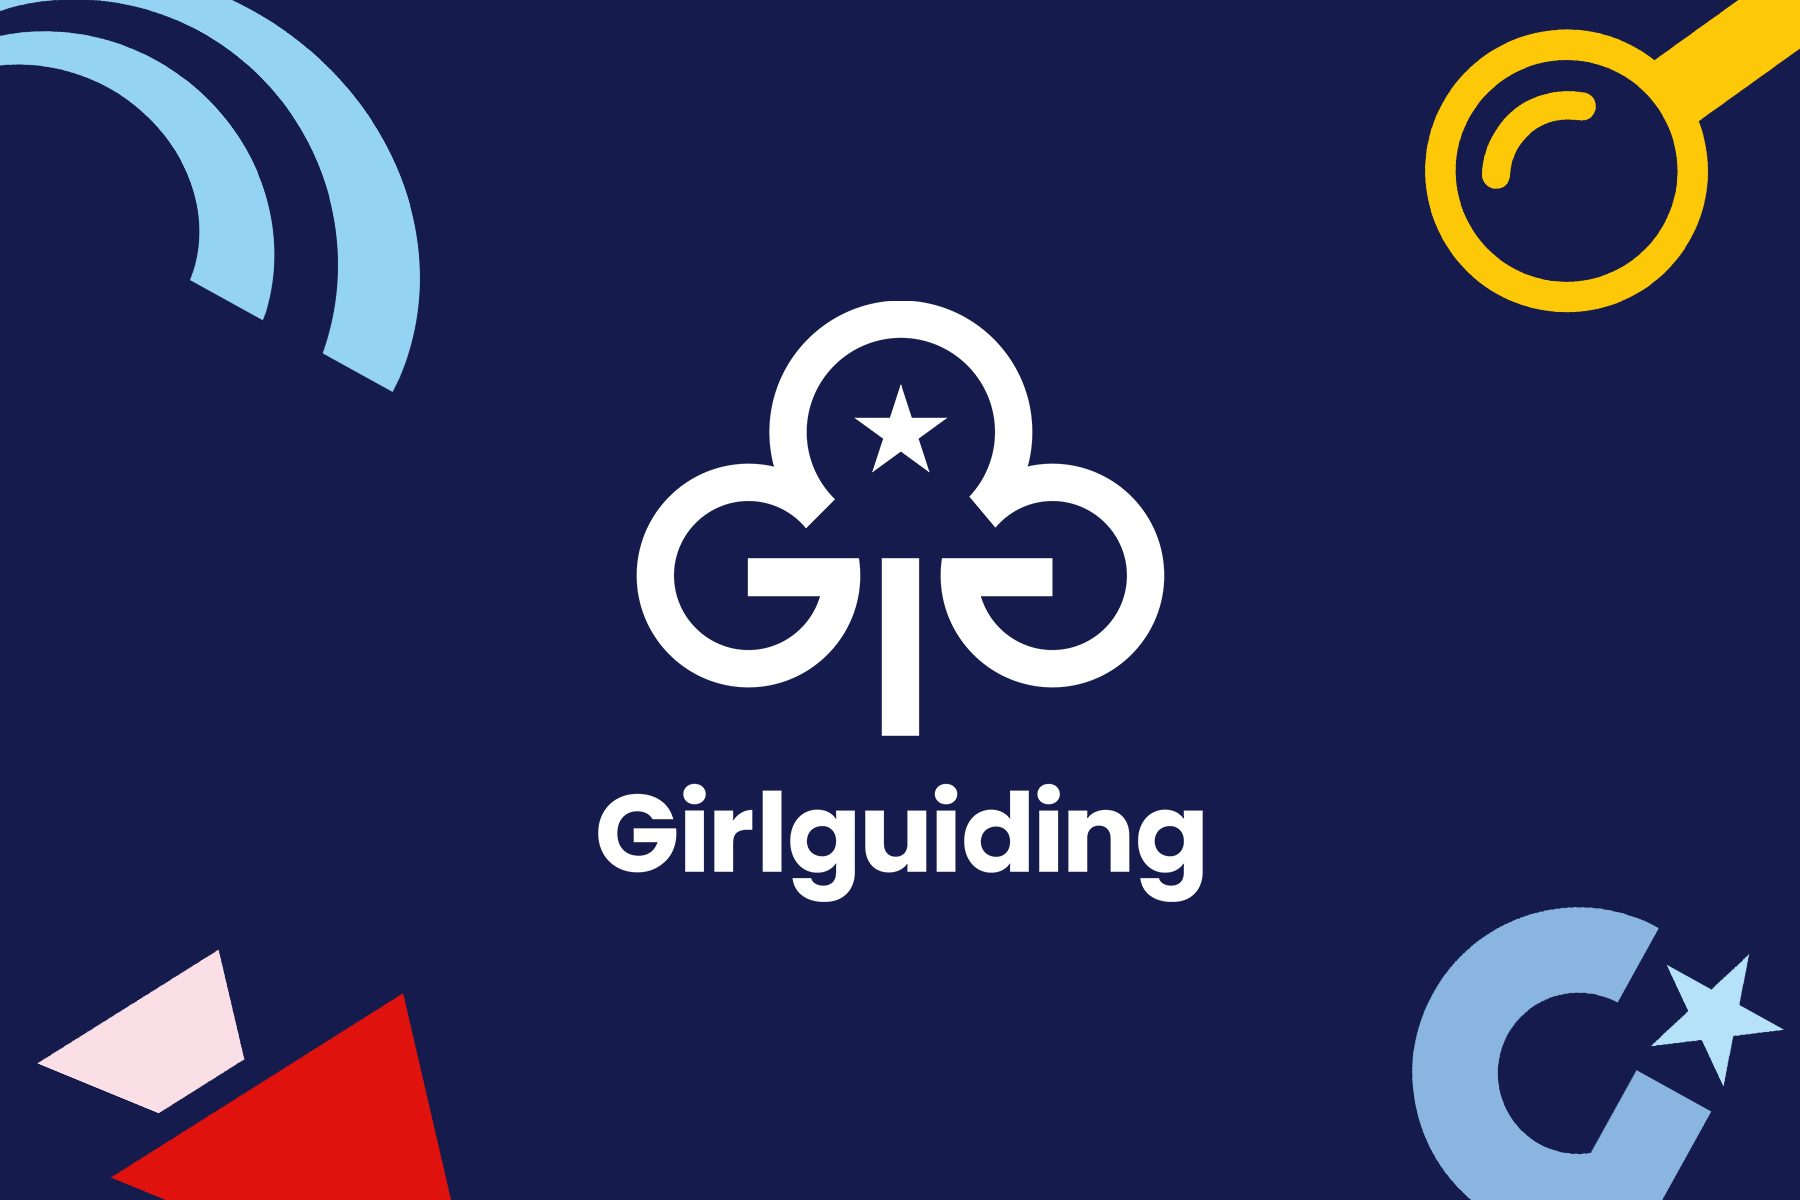 Graphic shows the new Girlguiding branding featuring a white tree emblem on a dark blue background